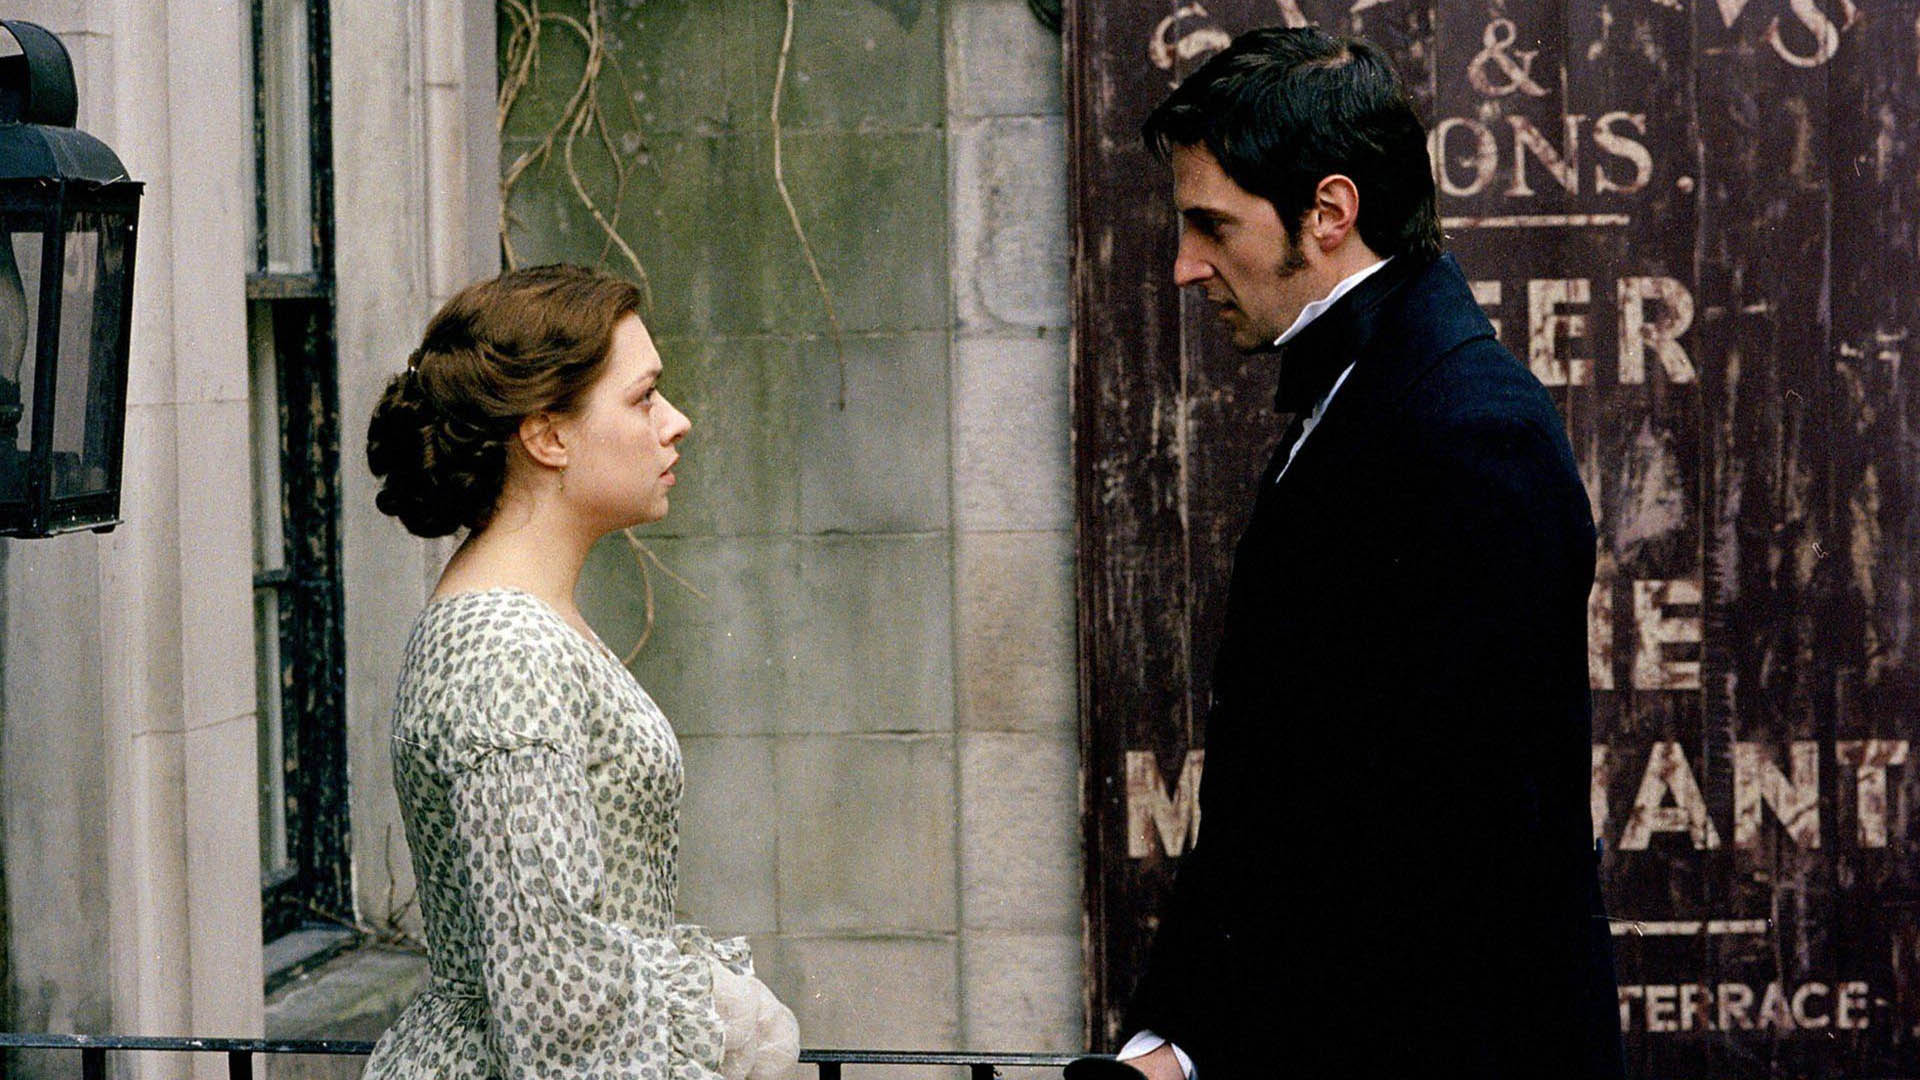 North and south 2004) trailer   youtube